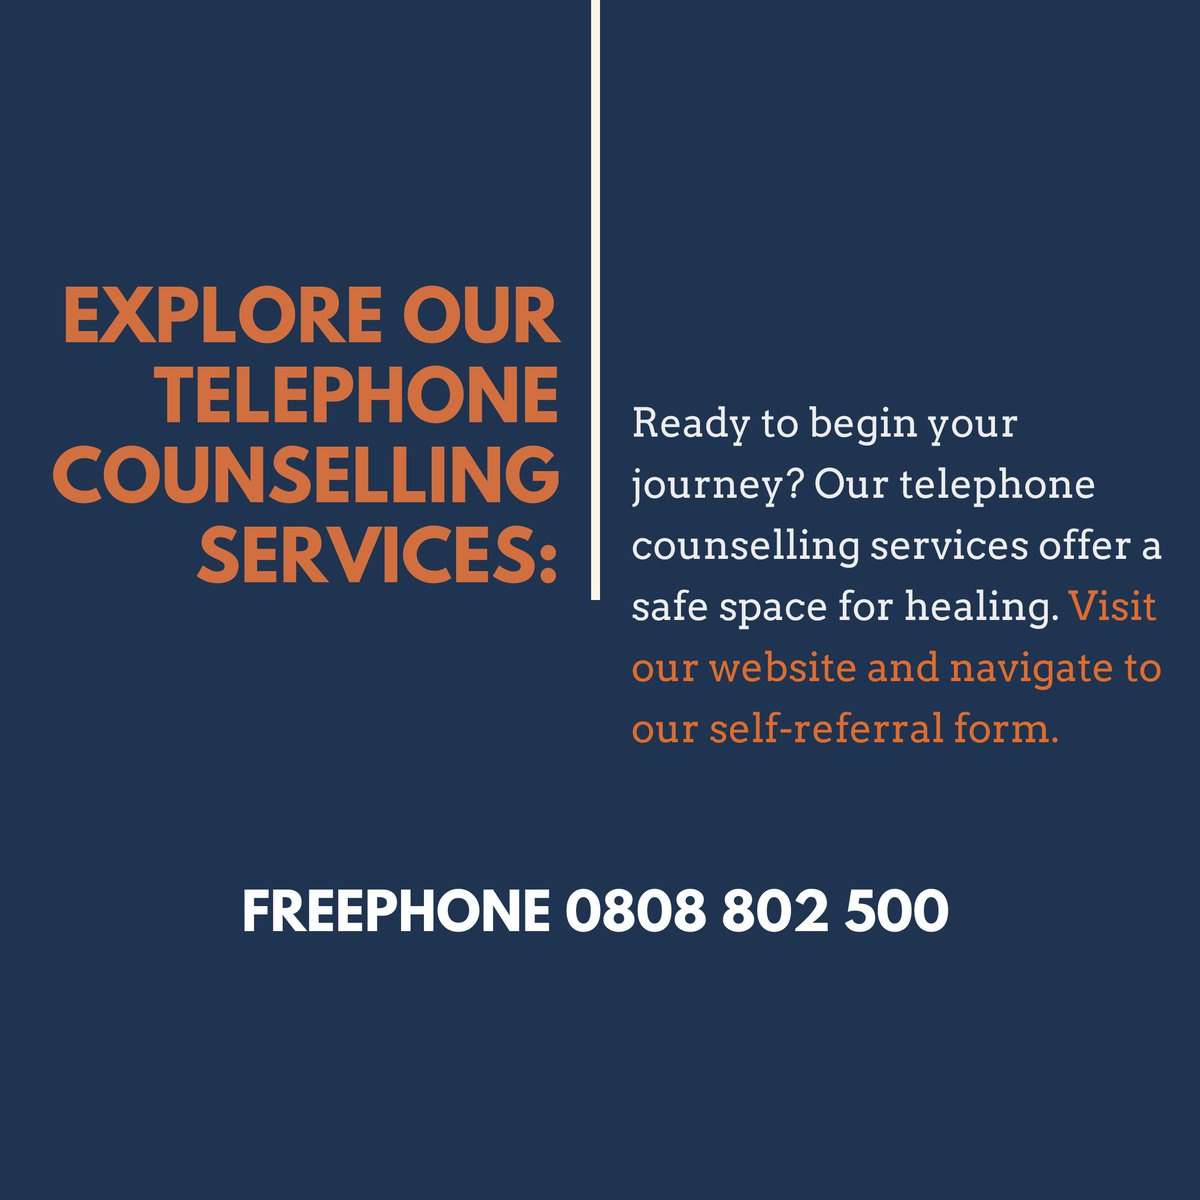 Explore Our Telephone Counselling Services:
Ready to begin your journey? Our telephone counselling services offer a safe space for healing. 📞 Visit our website and navigate to our self-referral form. #SeekSupport #CounselingServices #SDAC #SDACsupport